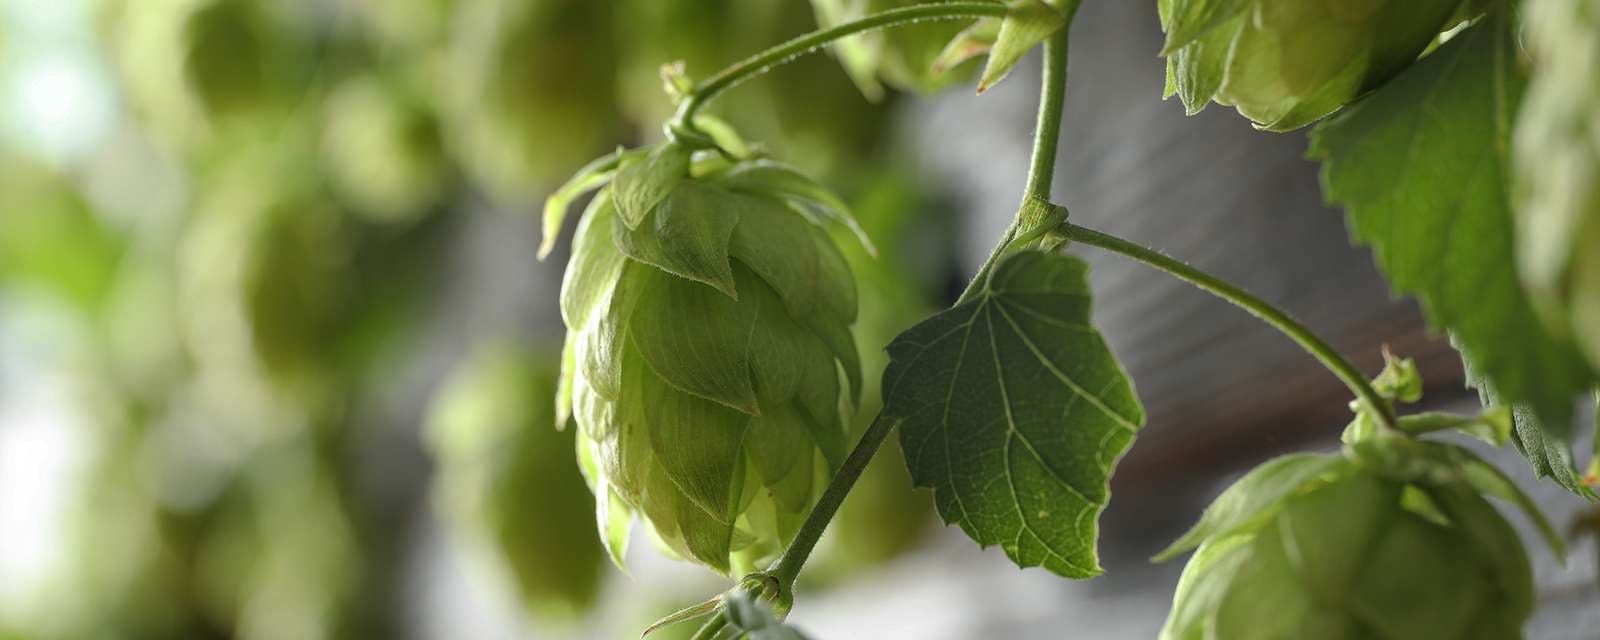 branch-of-hops-against-blurred-background-space-f-2021-09-02-20-10-10-utc